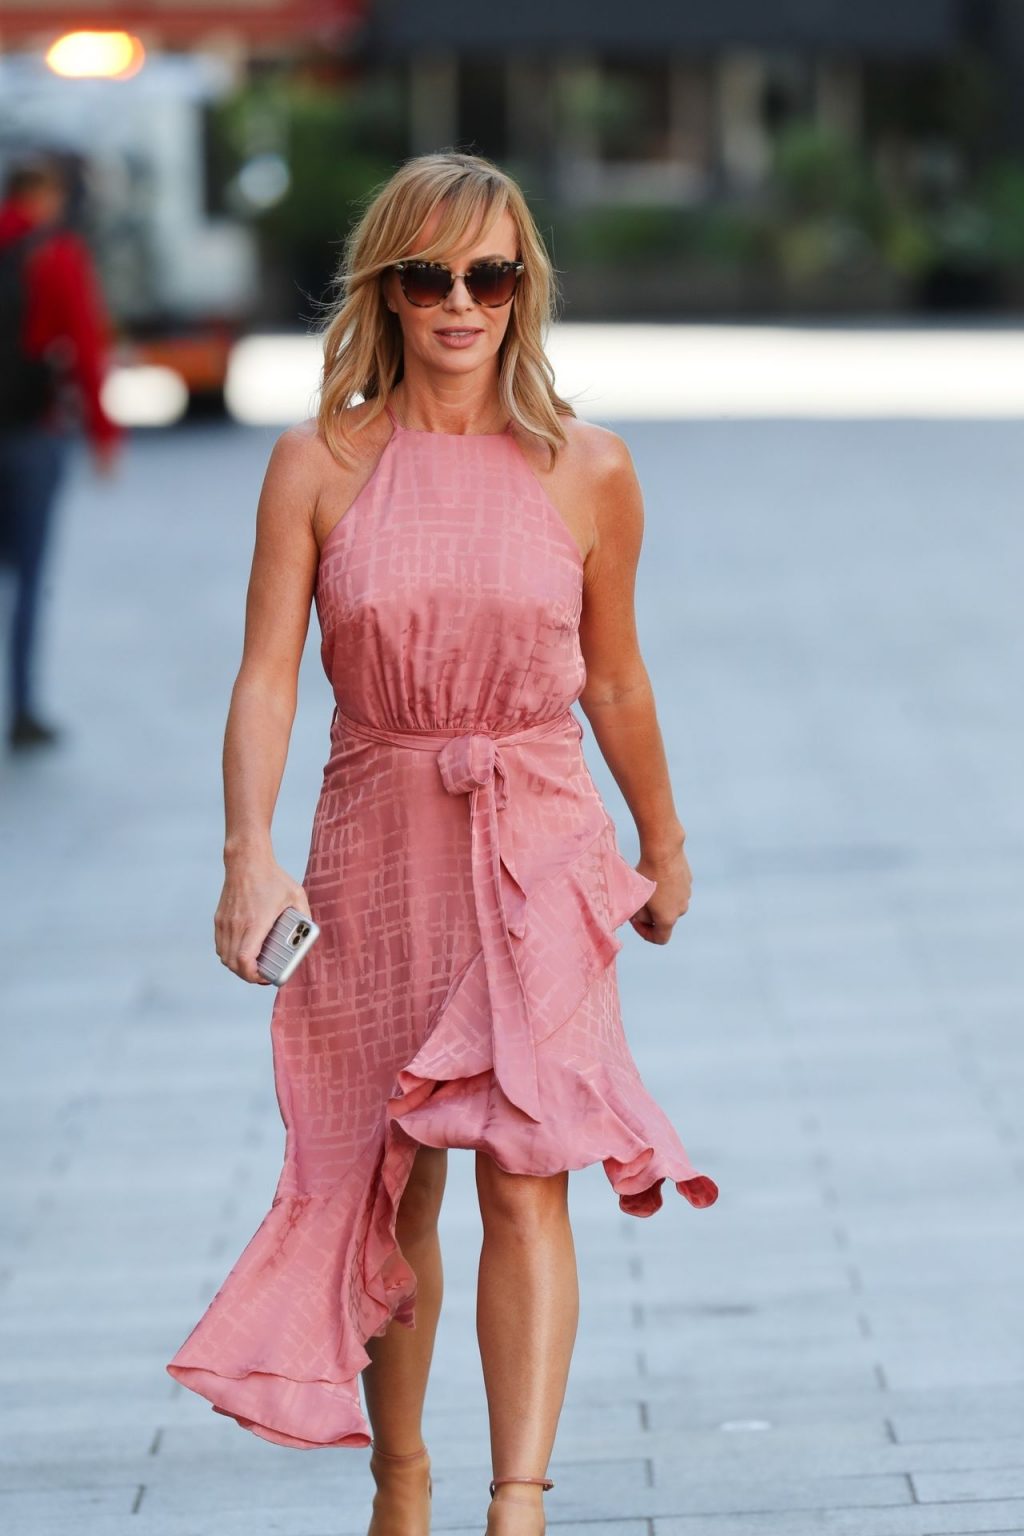 Amanda Holden Is Pictured While Leaving the Heart Radio Studios (43 Photos)